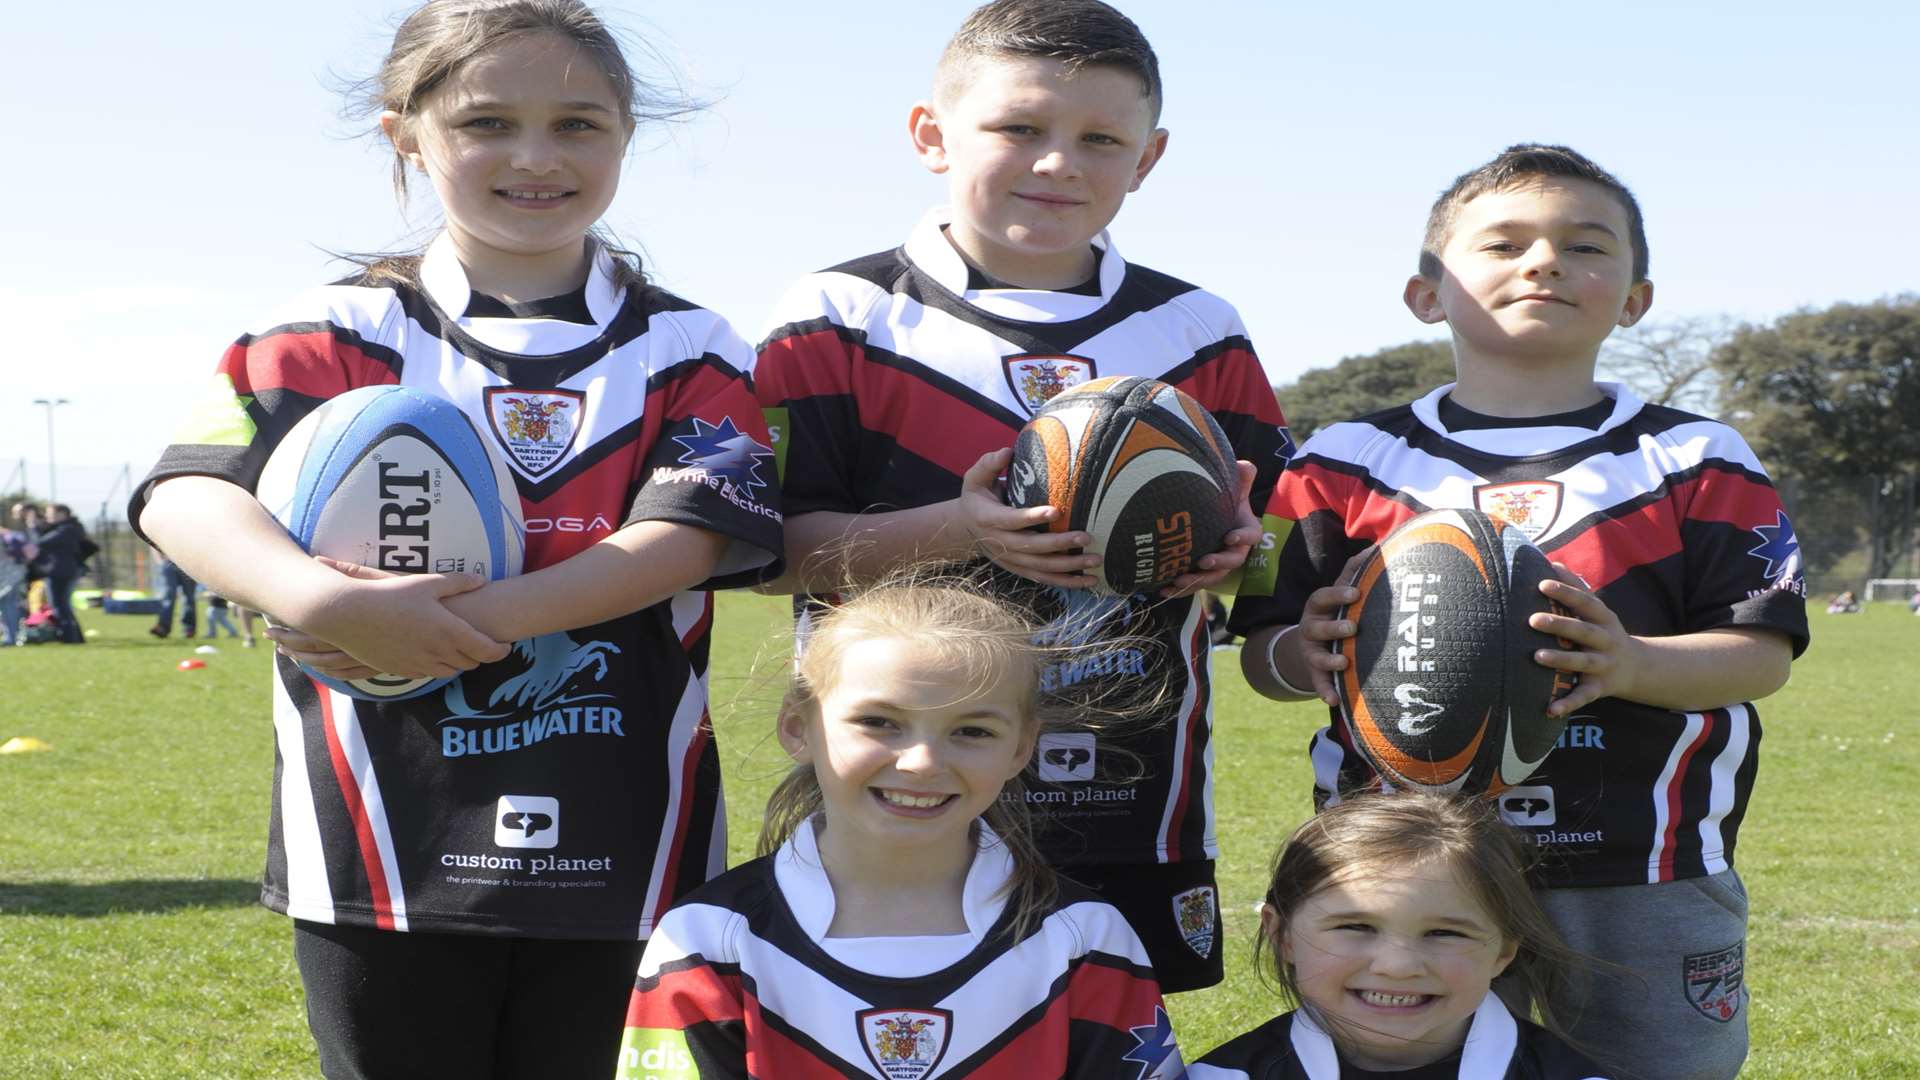 Siena Stickings (8), Ryan Morris (7), Luca Stickings (7), front: Brooke Drummond (8) and Carys Stickings (5) in their new kit